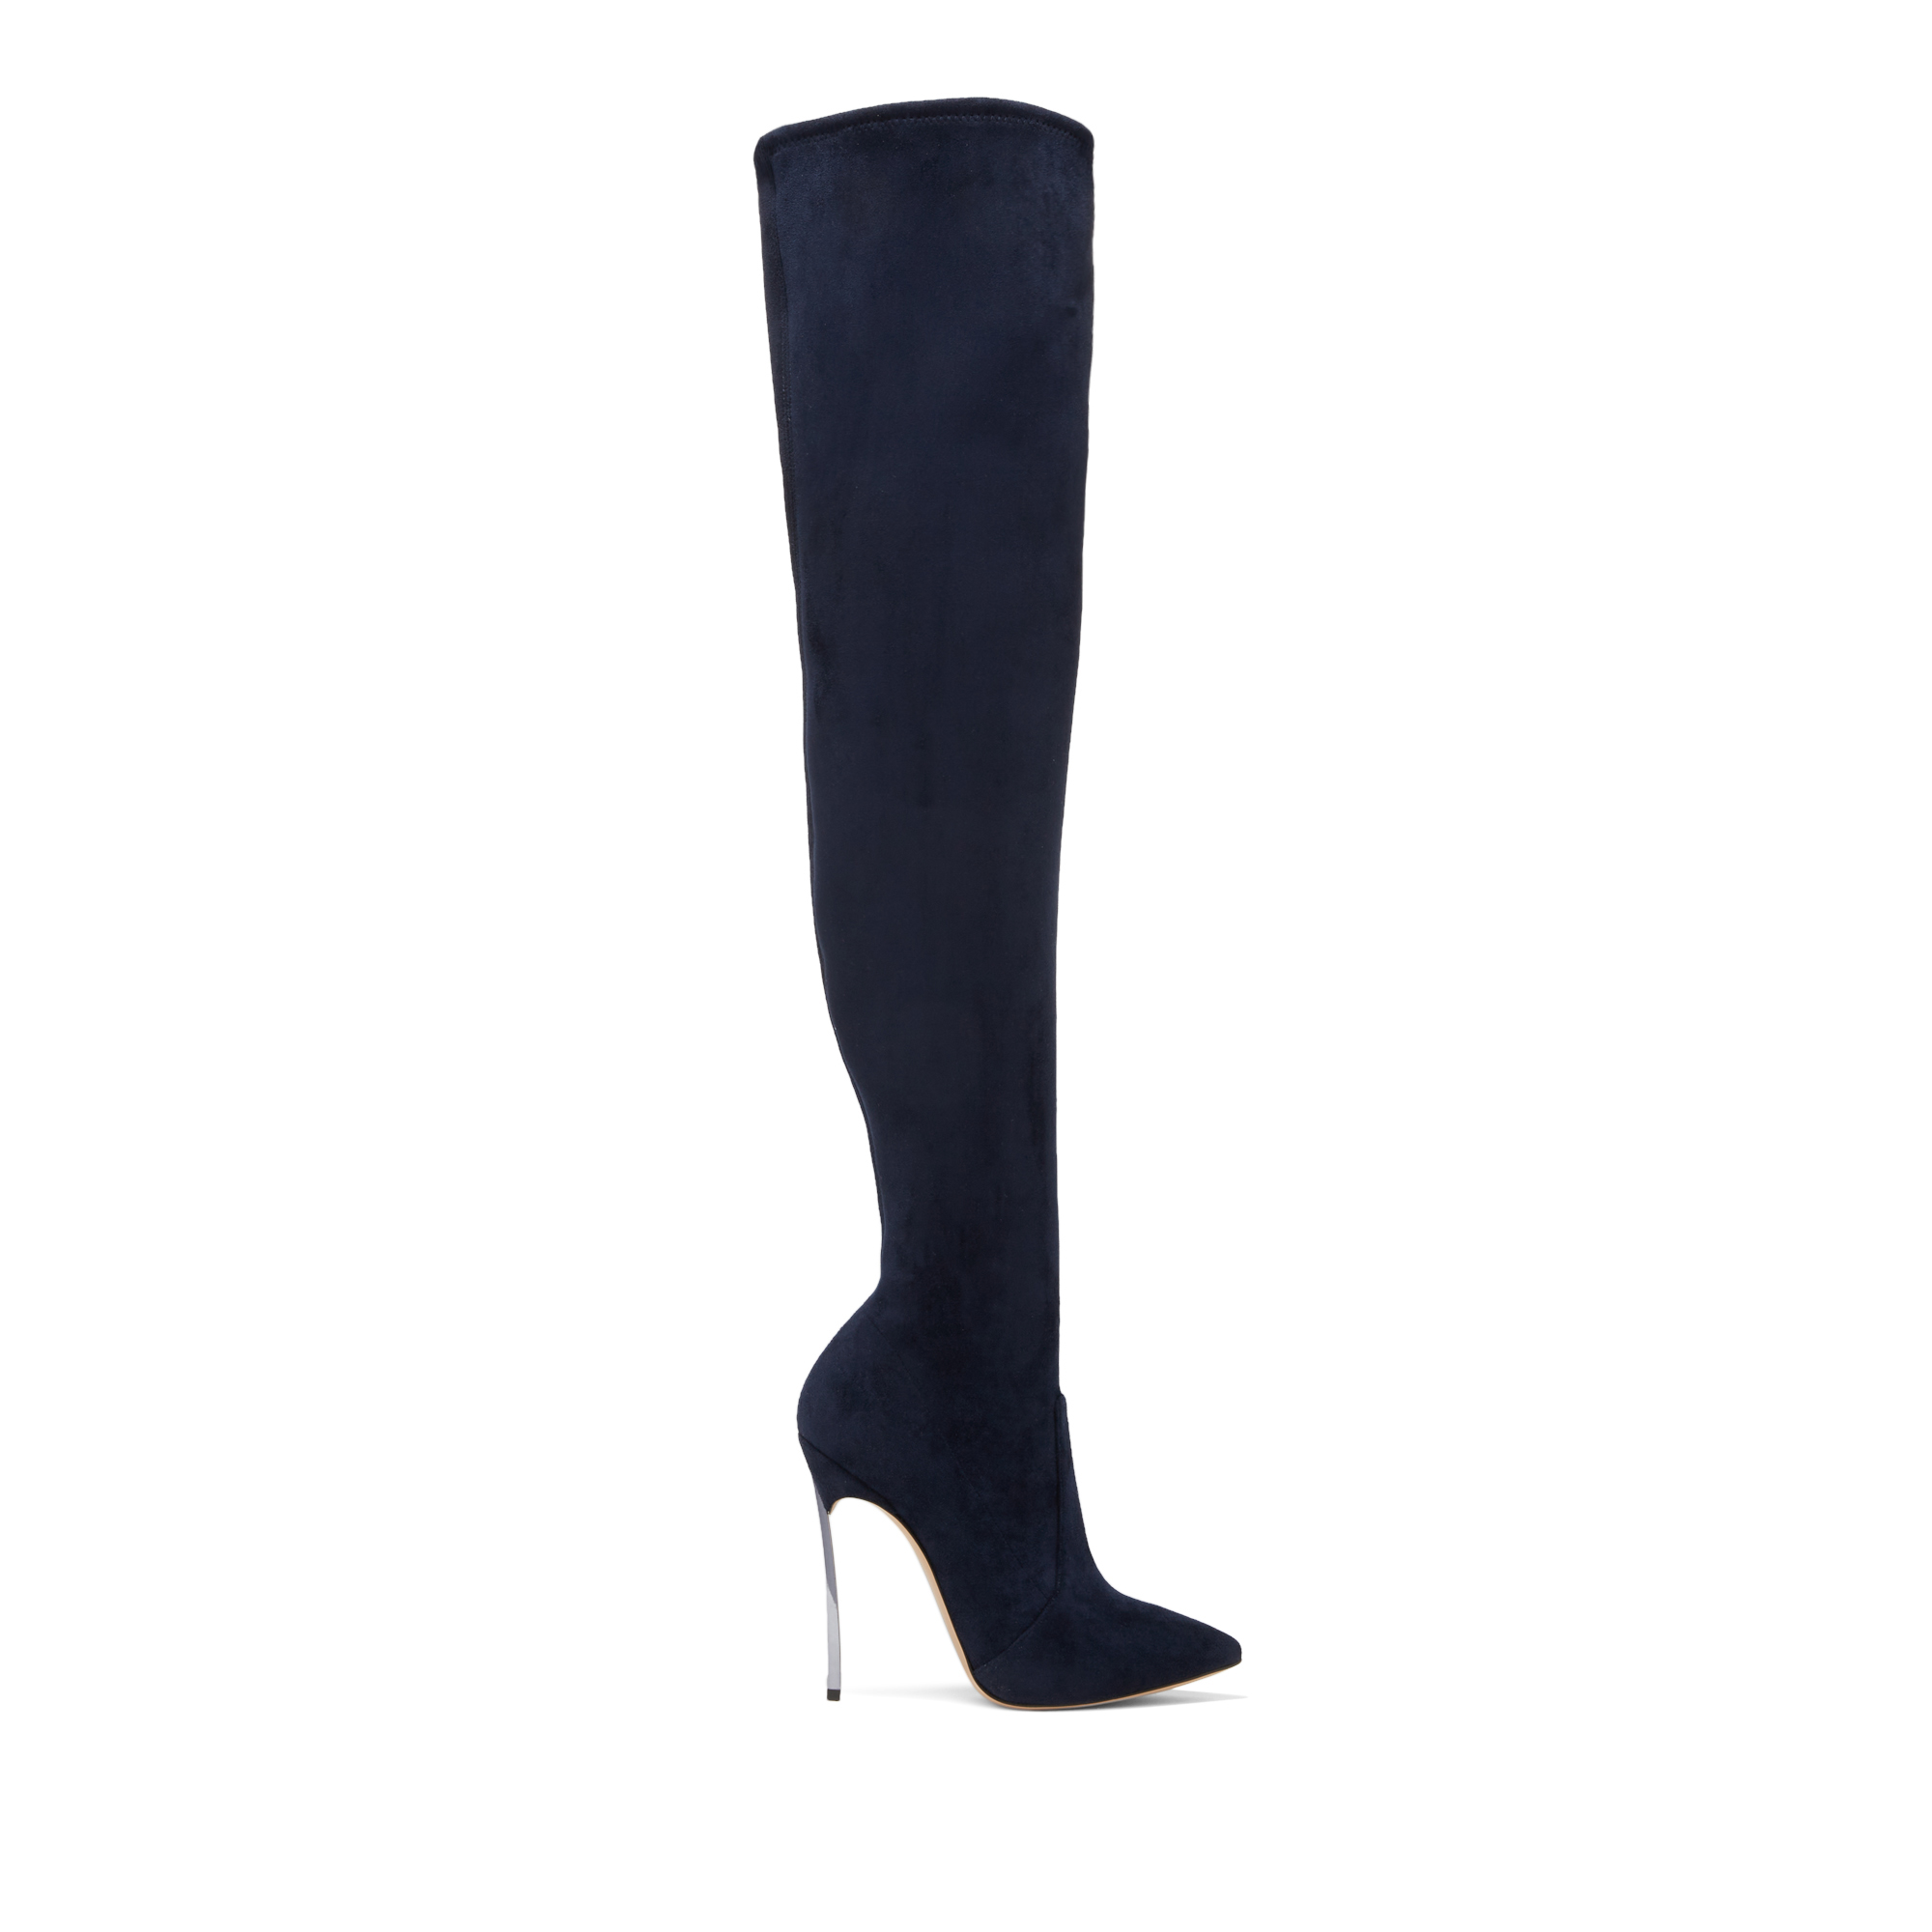 Casadei Blade Eco Suede - Woman Over The Knee Boots Prussian 39